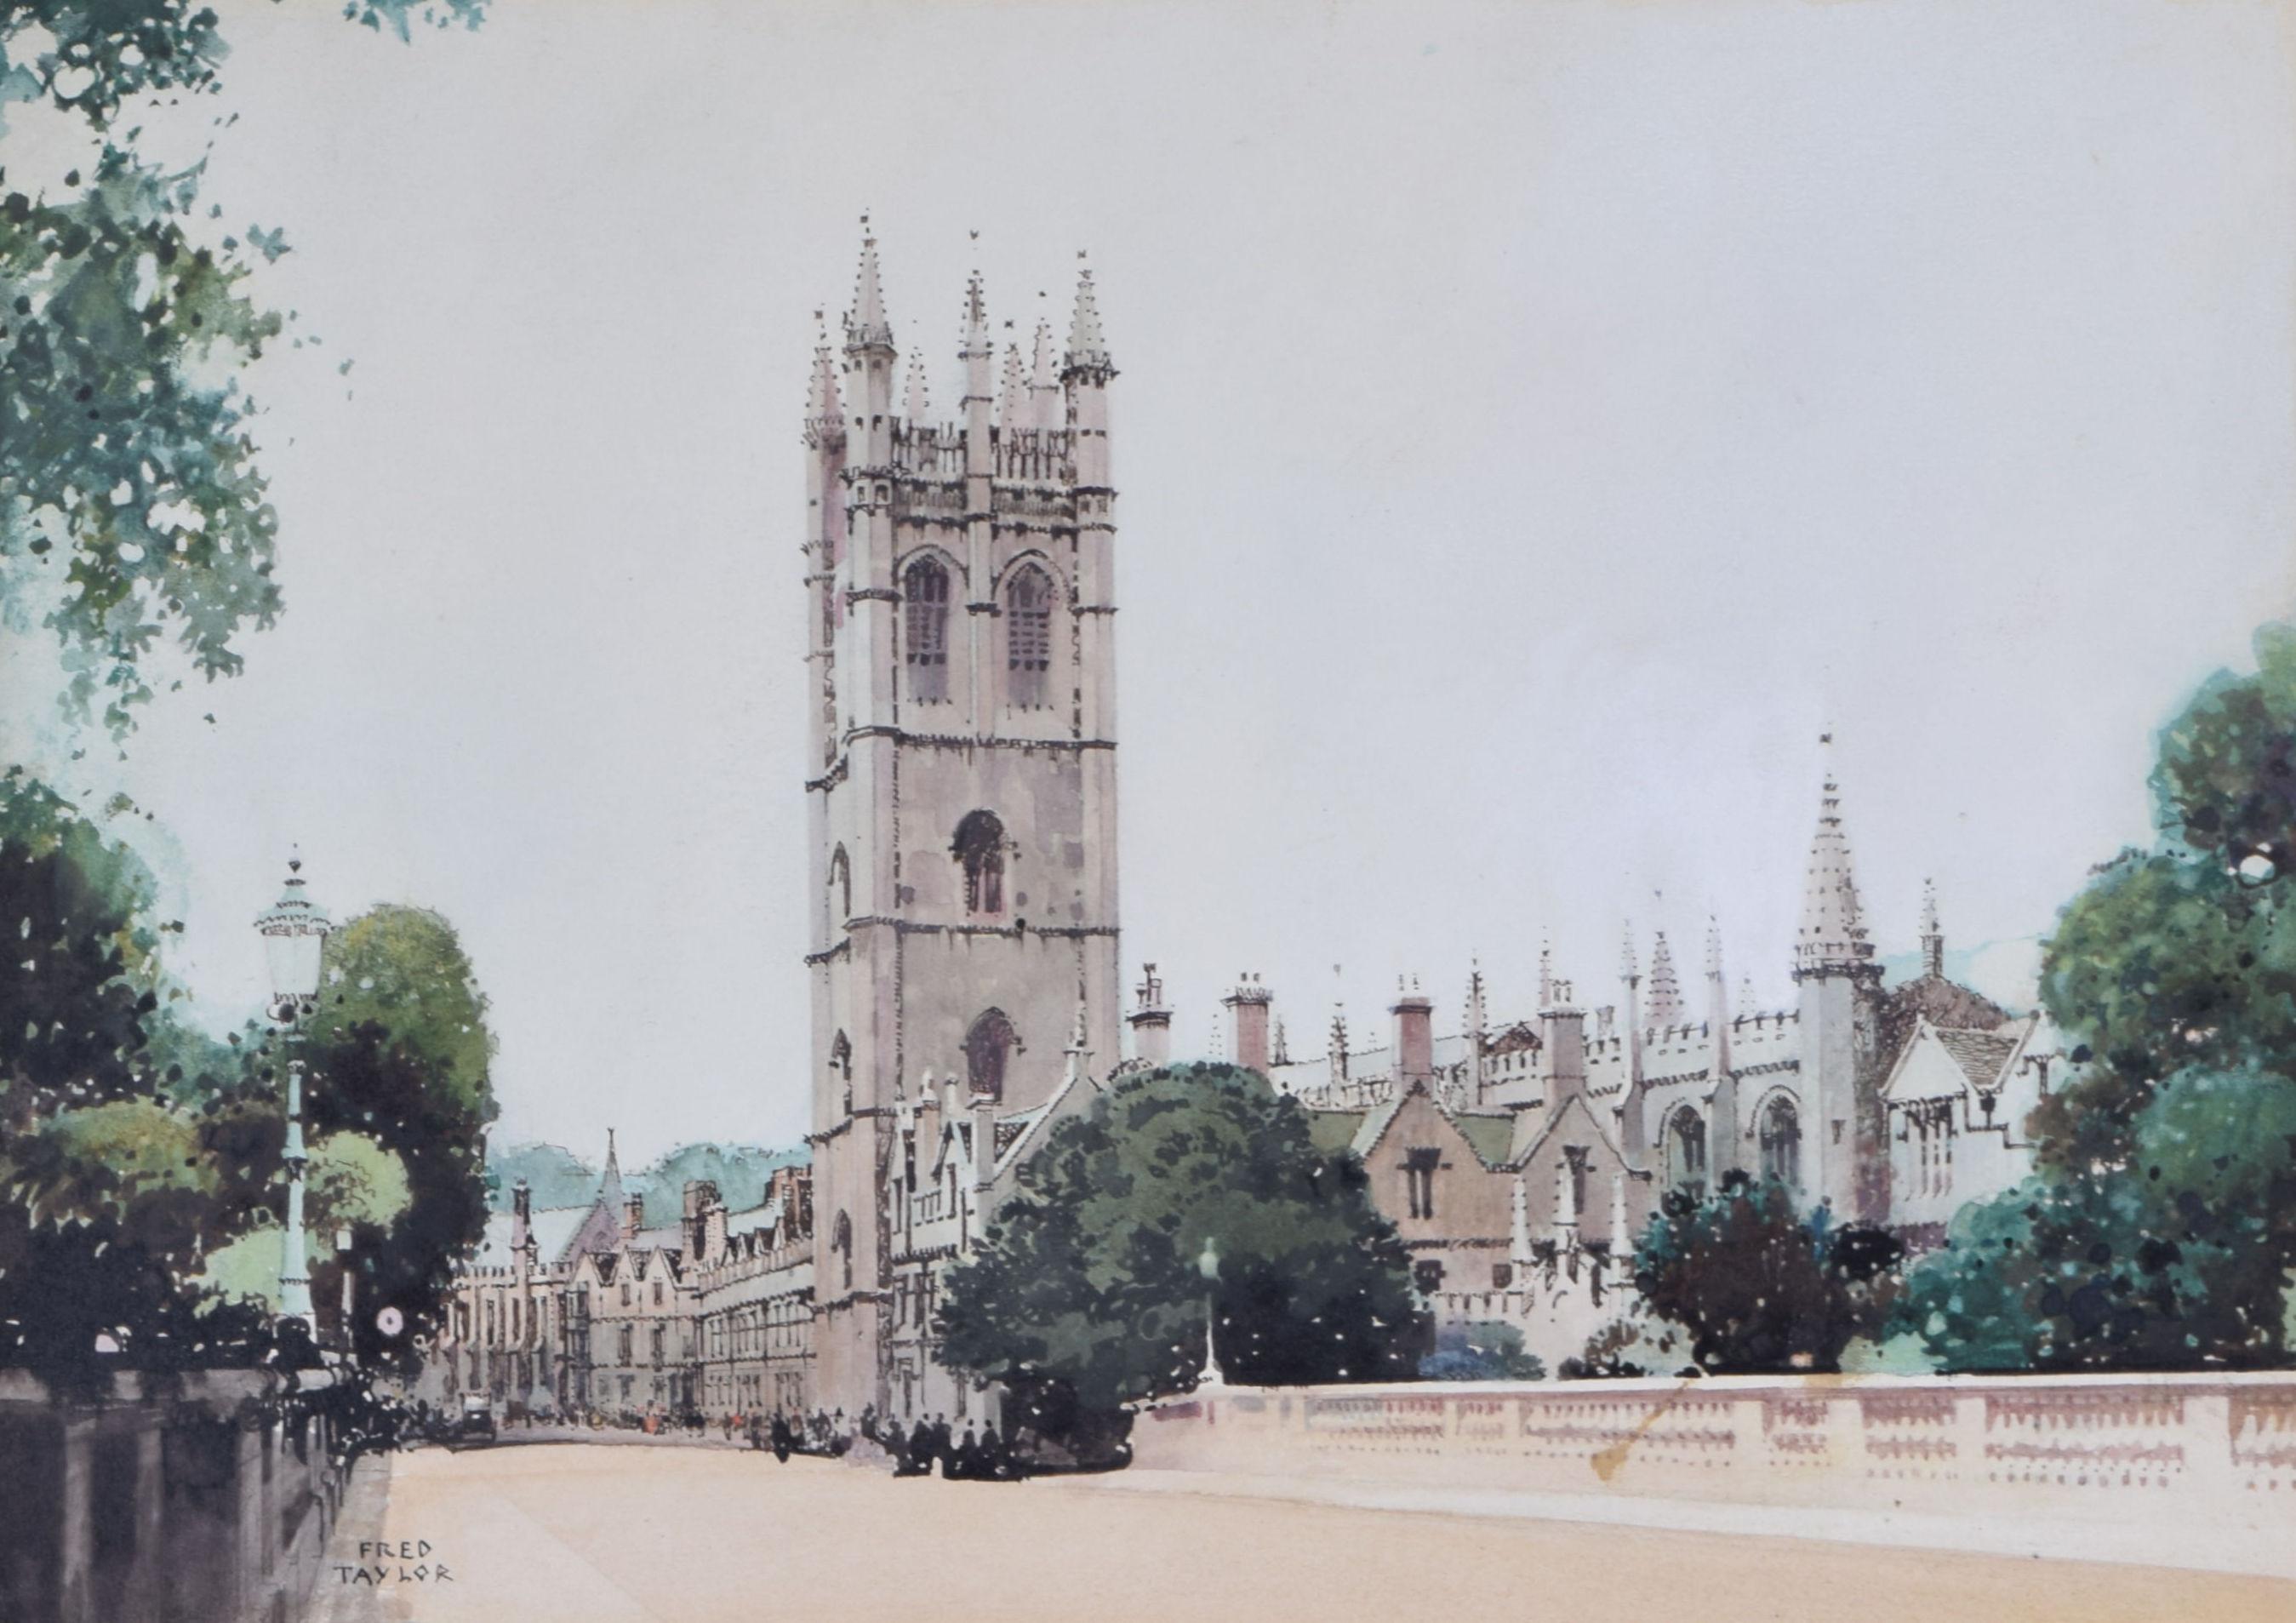 To see our other views of Oxford and Cambridge, scroll down to "More from this Seller" and below it click on "See all from this Seller" - or send us a message if you cannot find the view you want.

Fred Taylor (1875 - 1963)
Magdalen Tower from